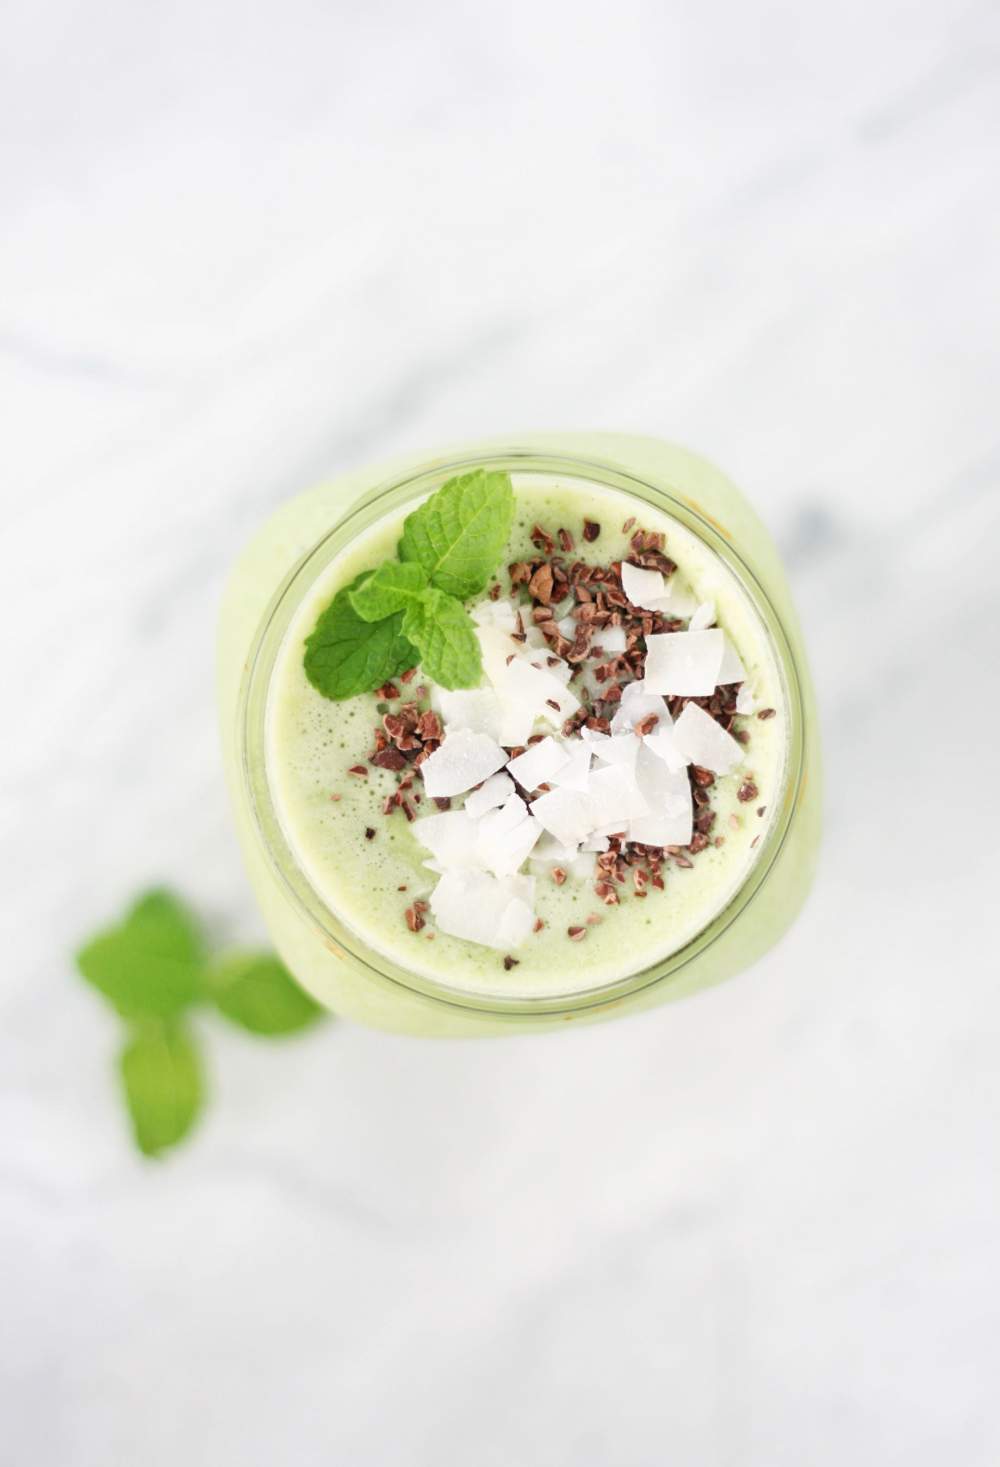 Mint cacao chip smoothie | Vegukate